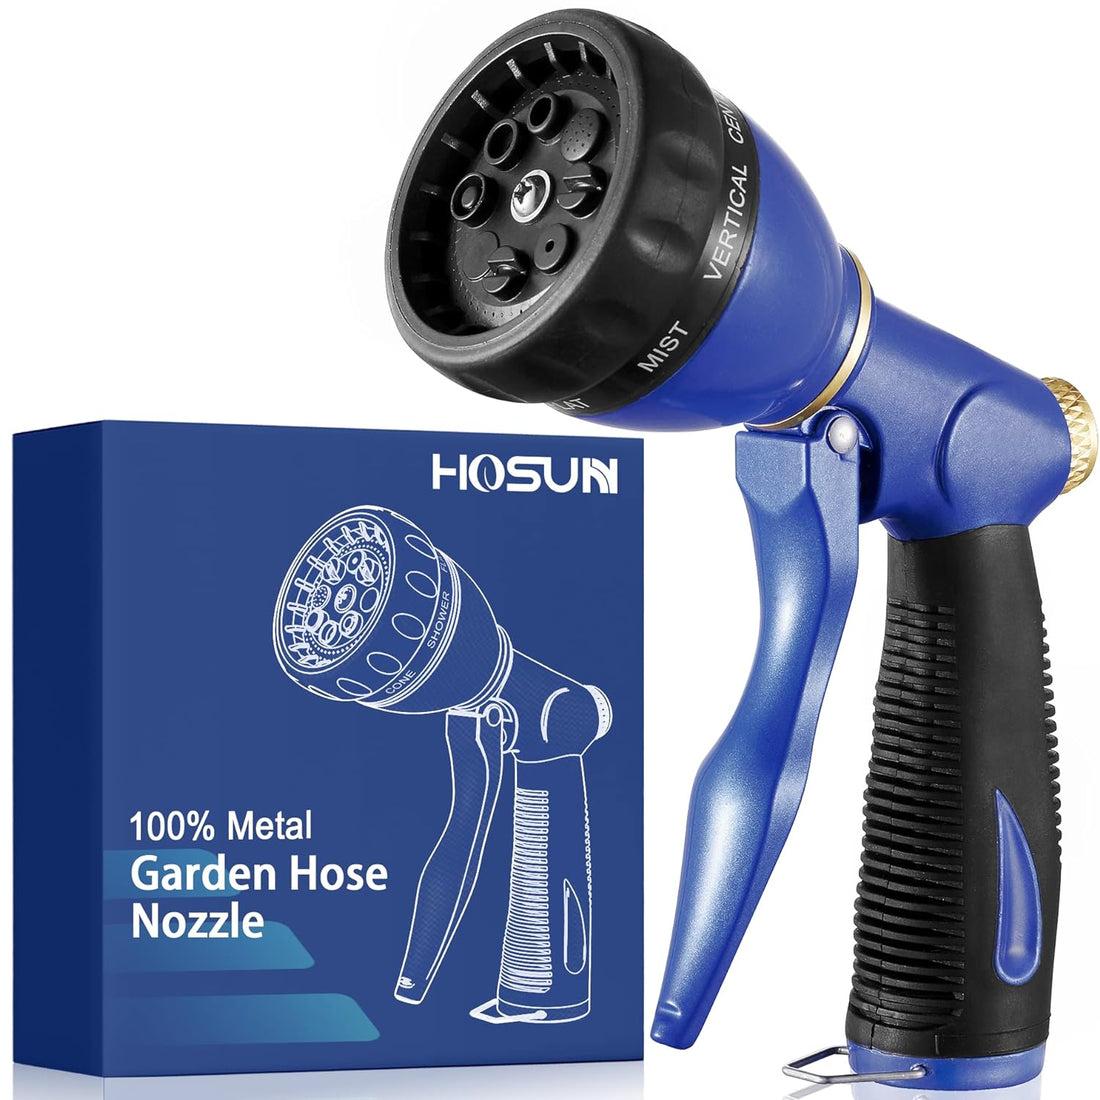 HOSUN Garden Hose Sprayer Nozzle 100% Heavy Duty Metal, Water Hose Nozzle with 8 Different Spray Patterns, High Pressure Hose Spray Nozzle for Watering Plant & Lawn, Washing Car & Pet